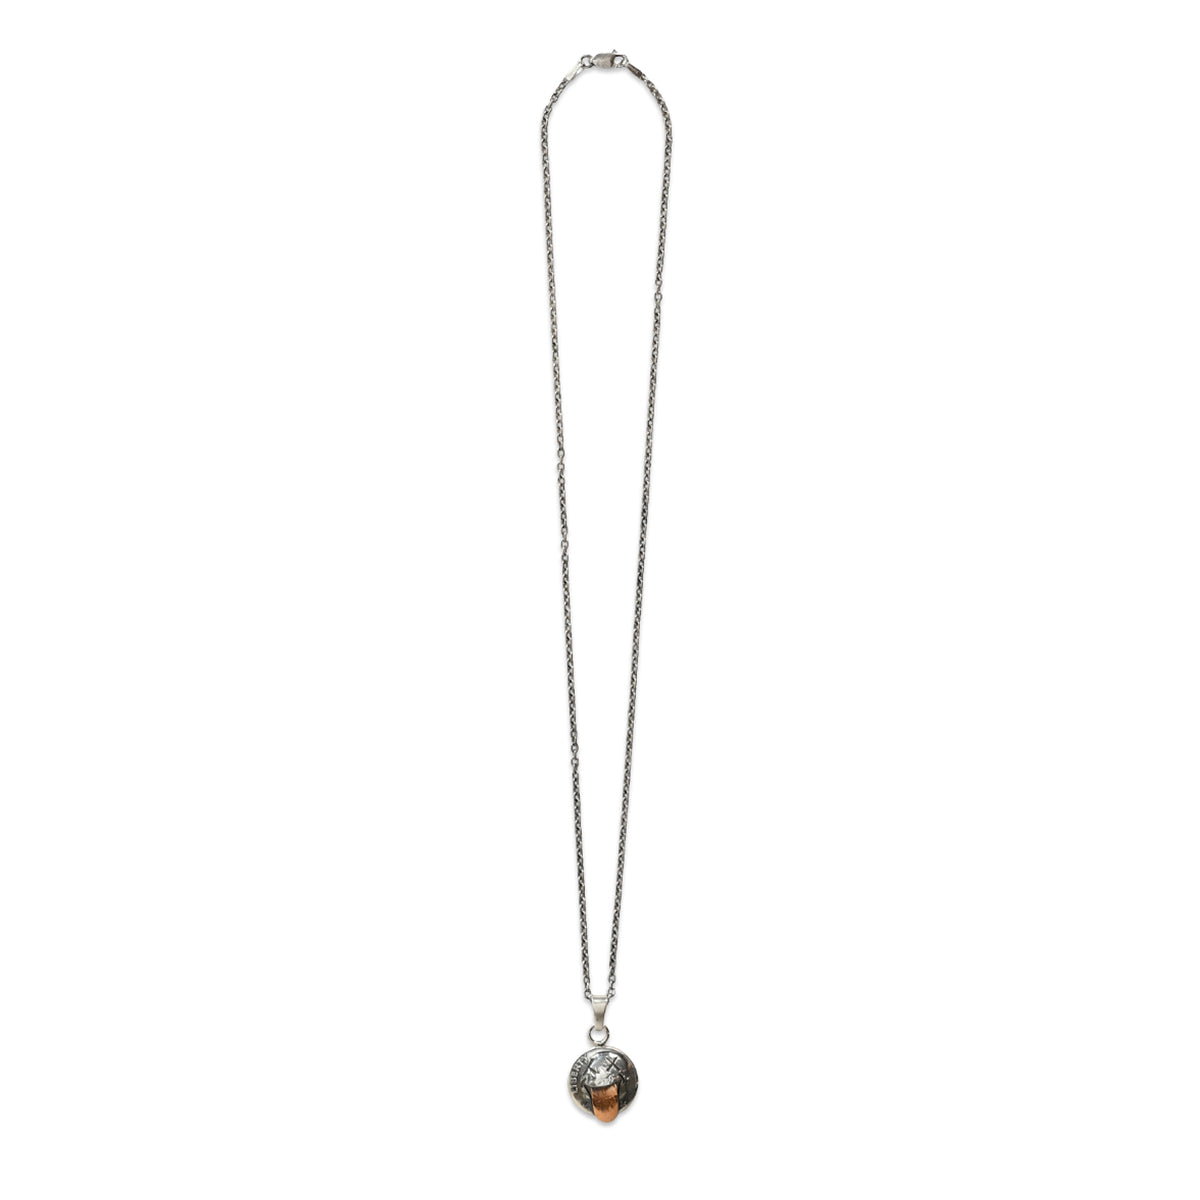 NORTH WORKS - NECKLACE - DRUNK TONGUE 50CM - N-613